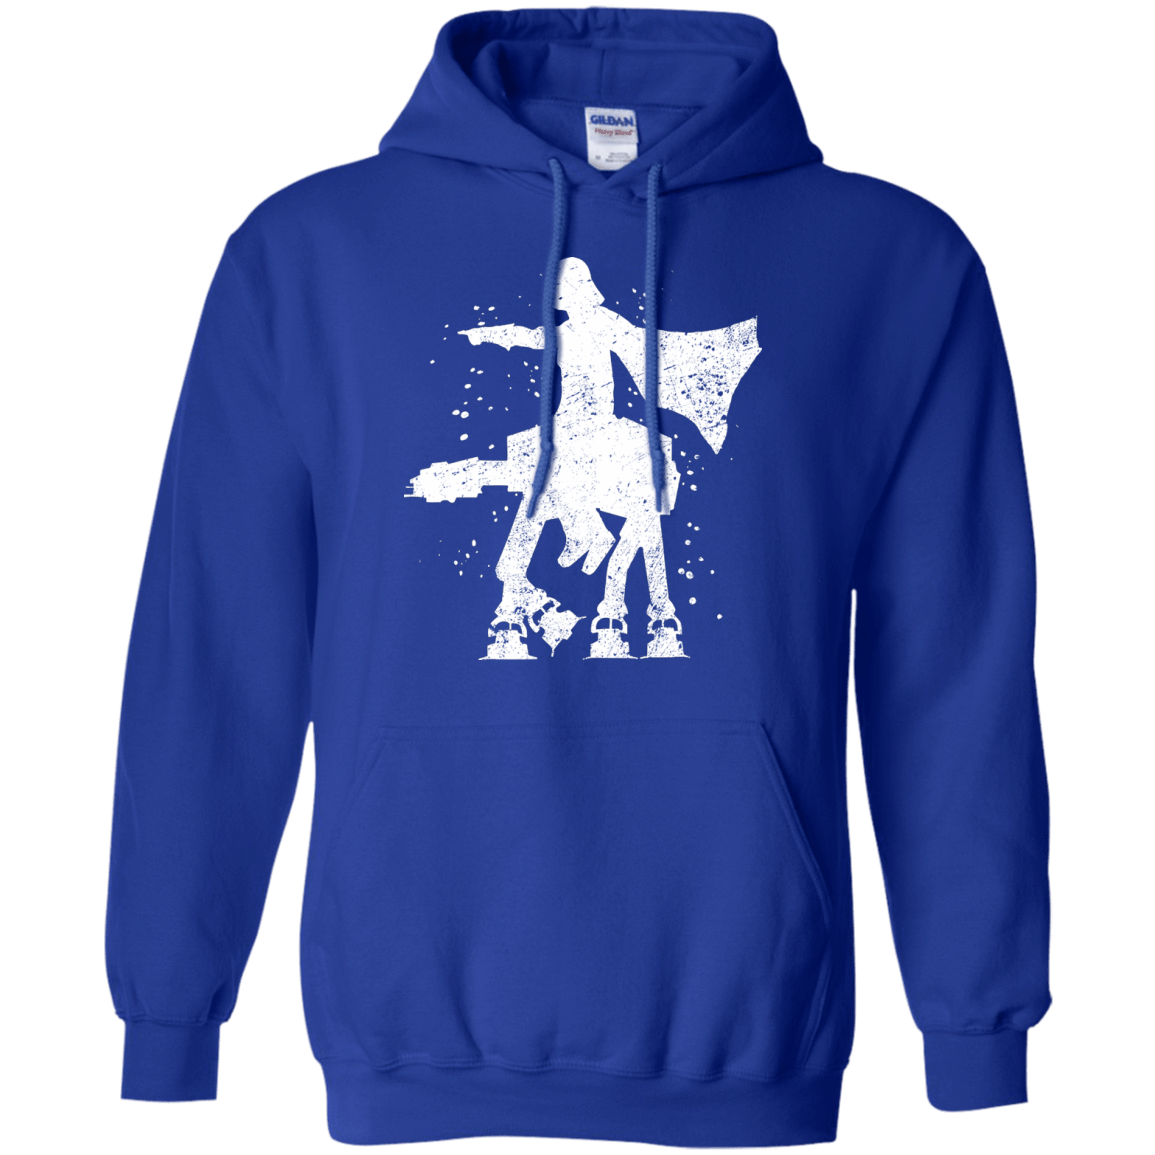 Sweatshirts Royal / S To Hoth Pullover Hoodie